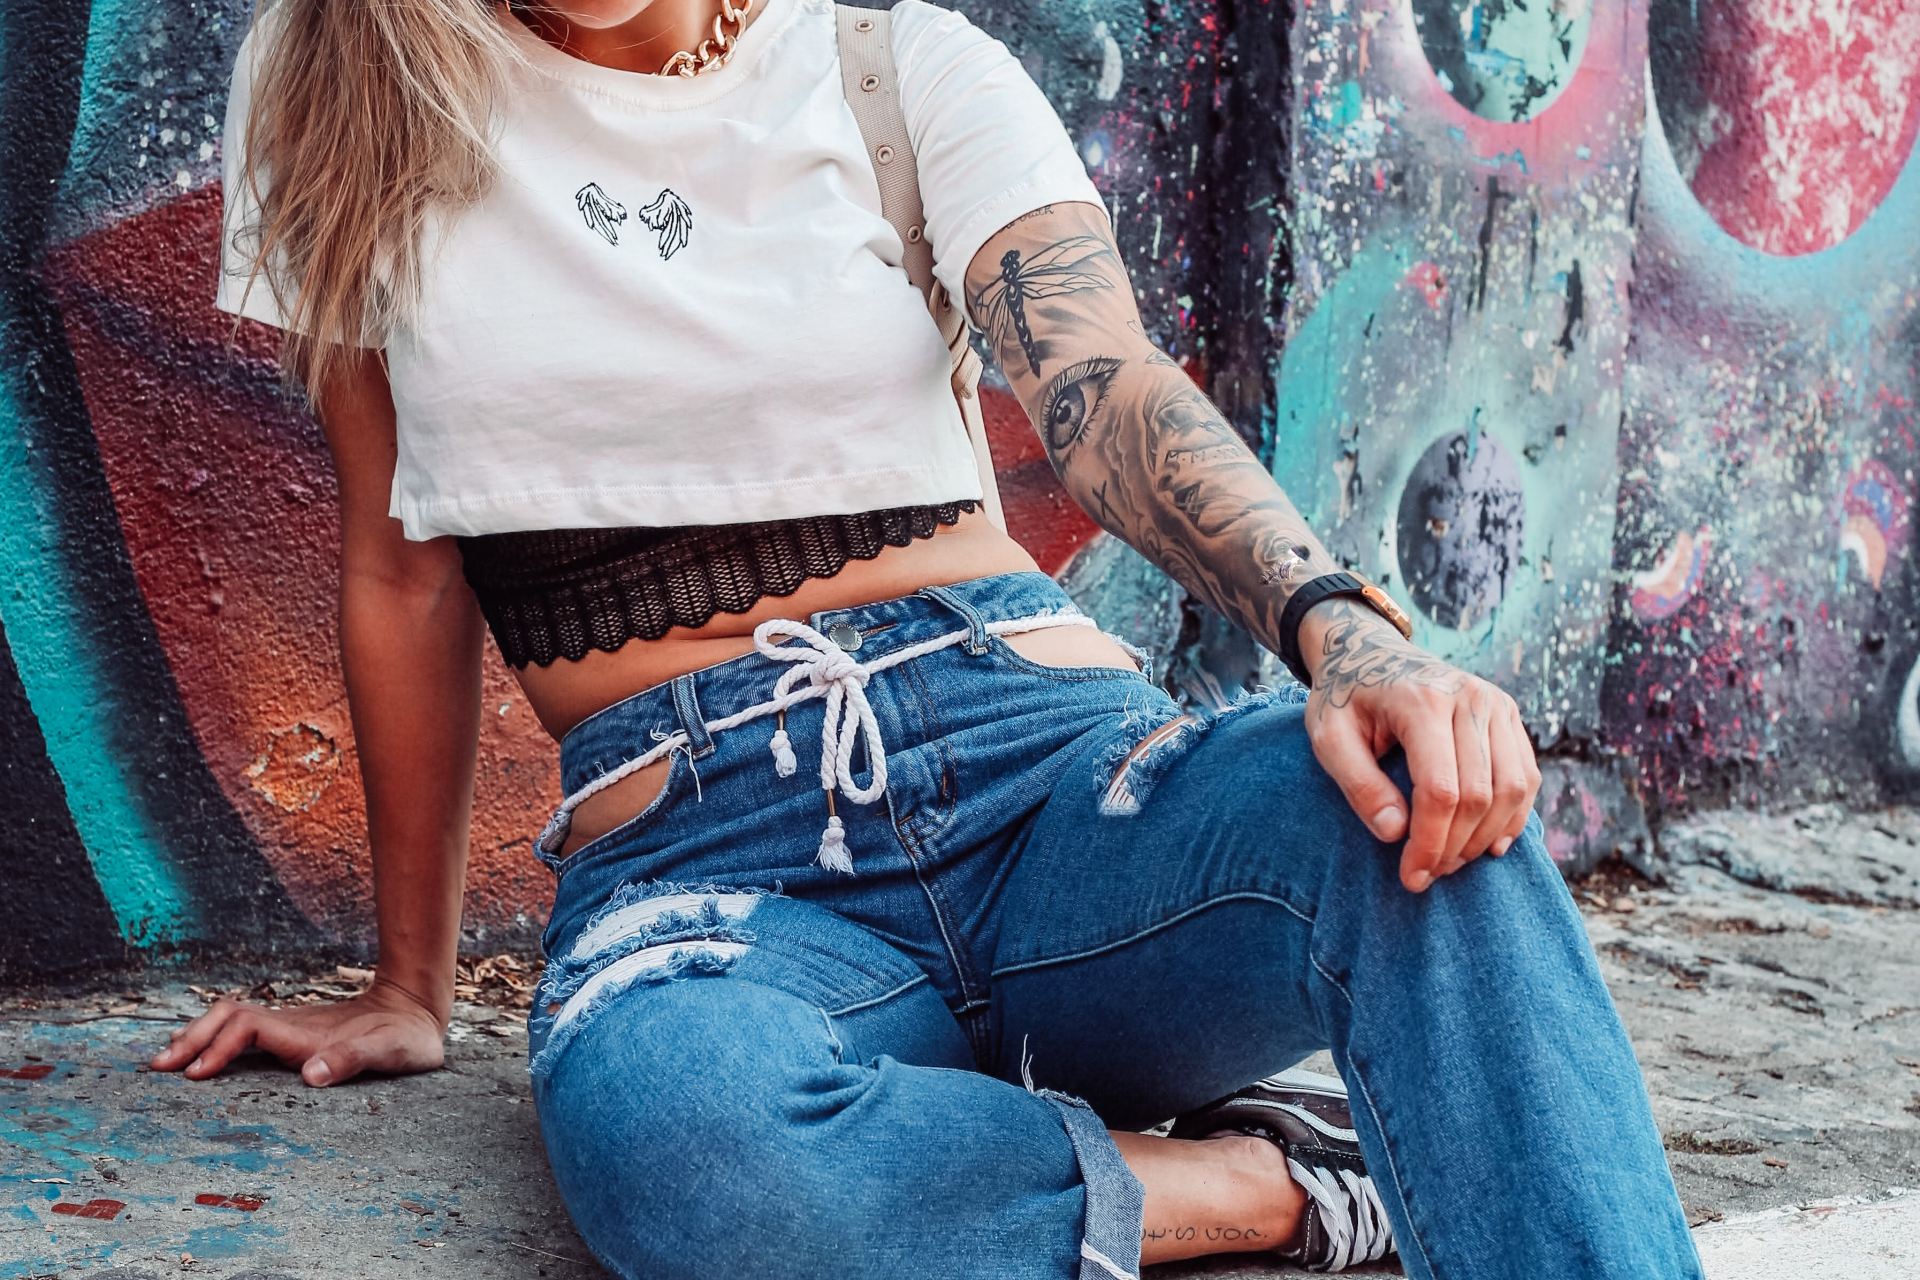 woman in white long sleeve shirt and blue denim jeans sitting on concrete wall during daytime